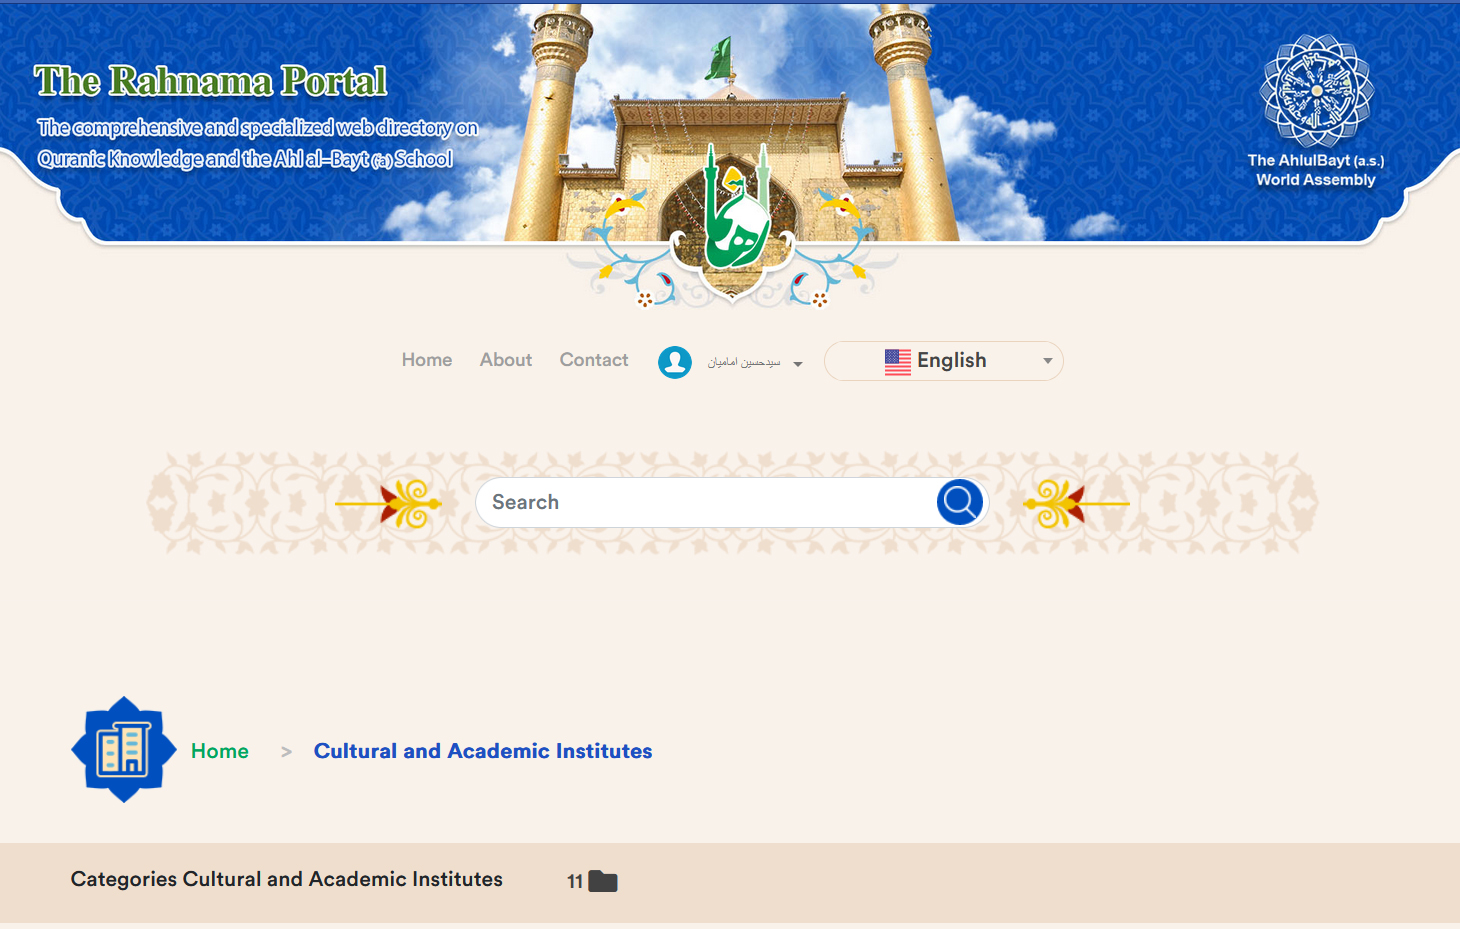 Access to sites with the topics of Religious Bookstores, Libraries and Museums, and Publishers has been provided on the Rahnama Portal